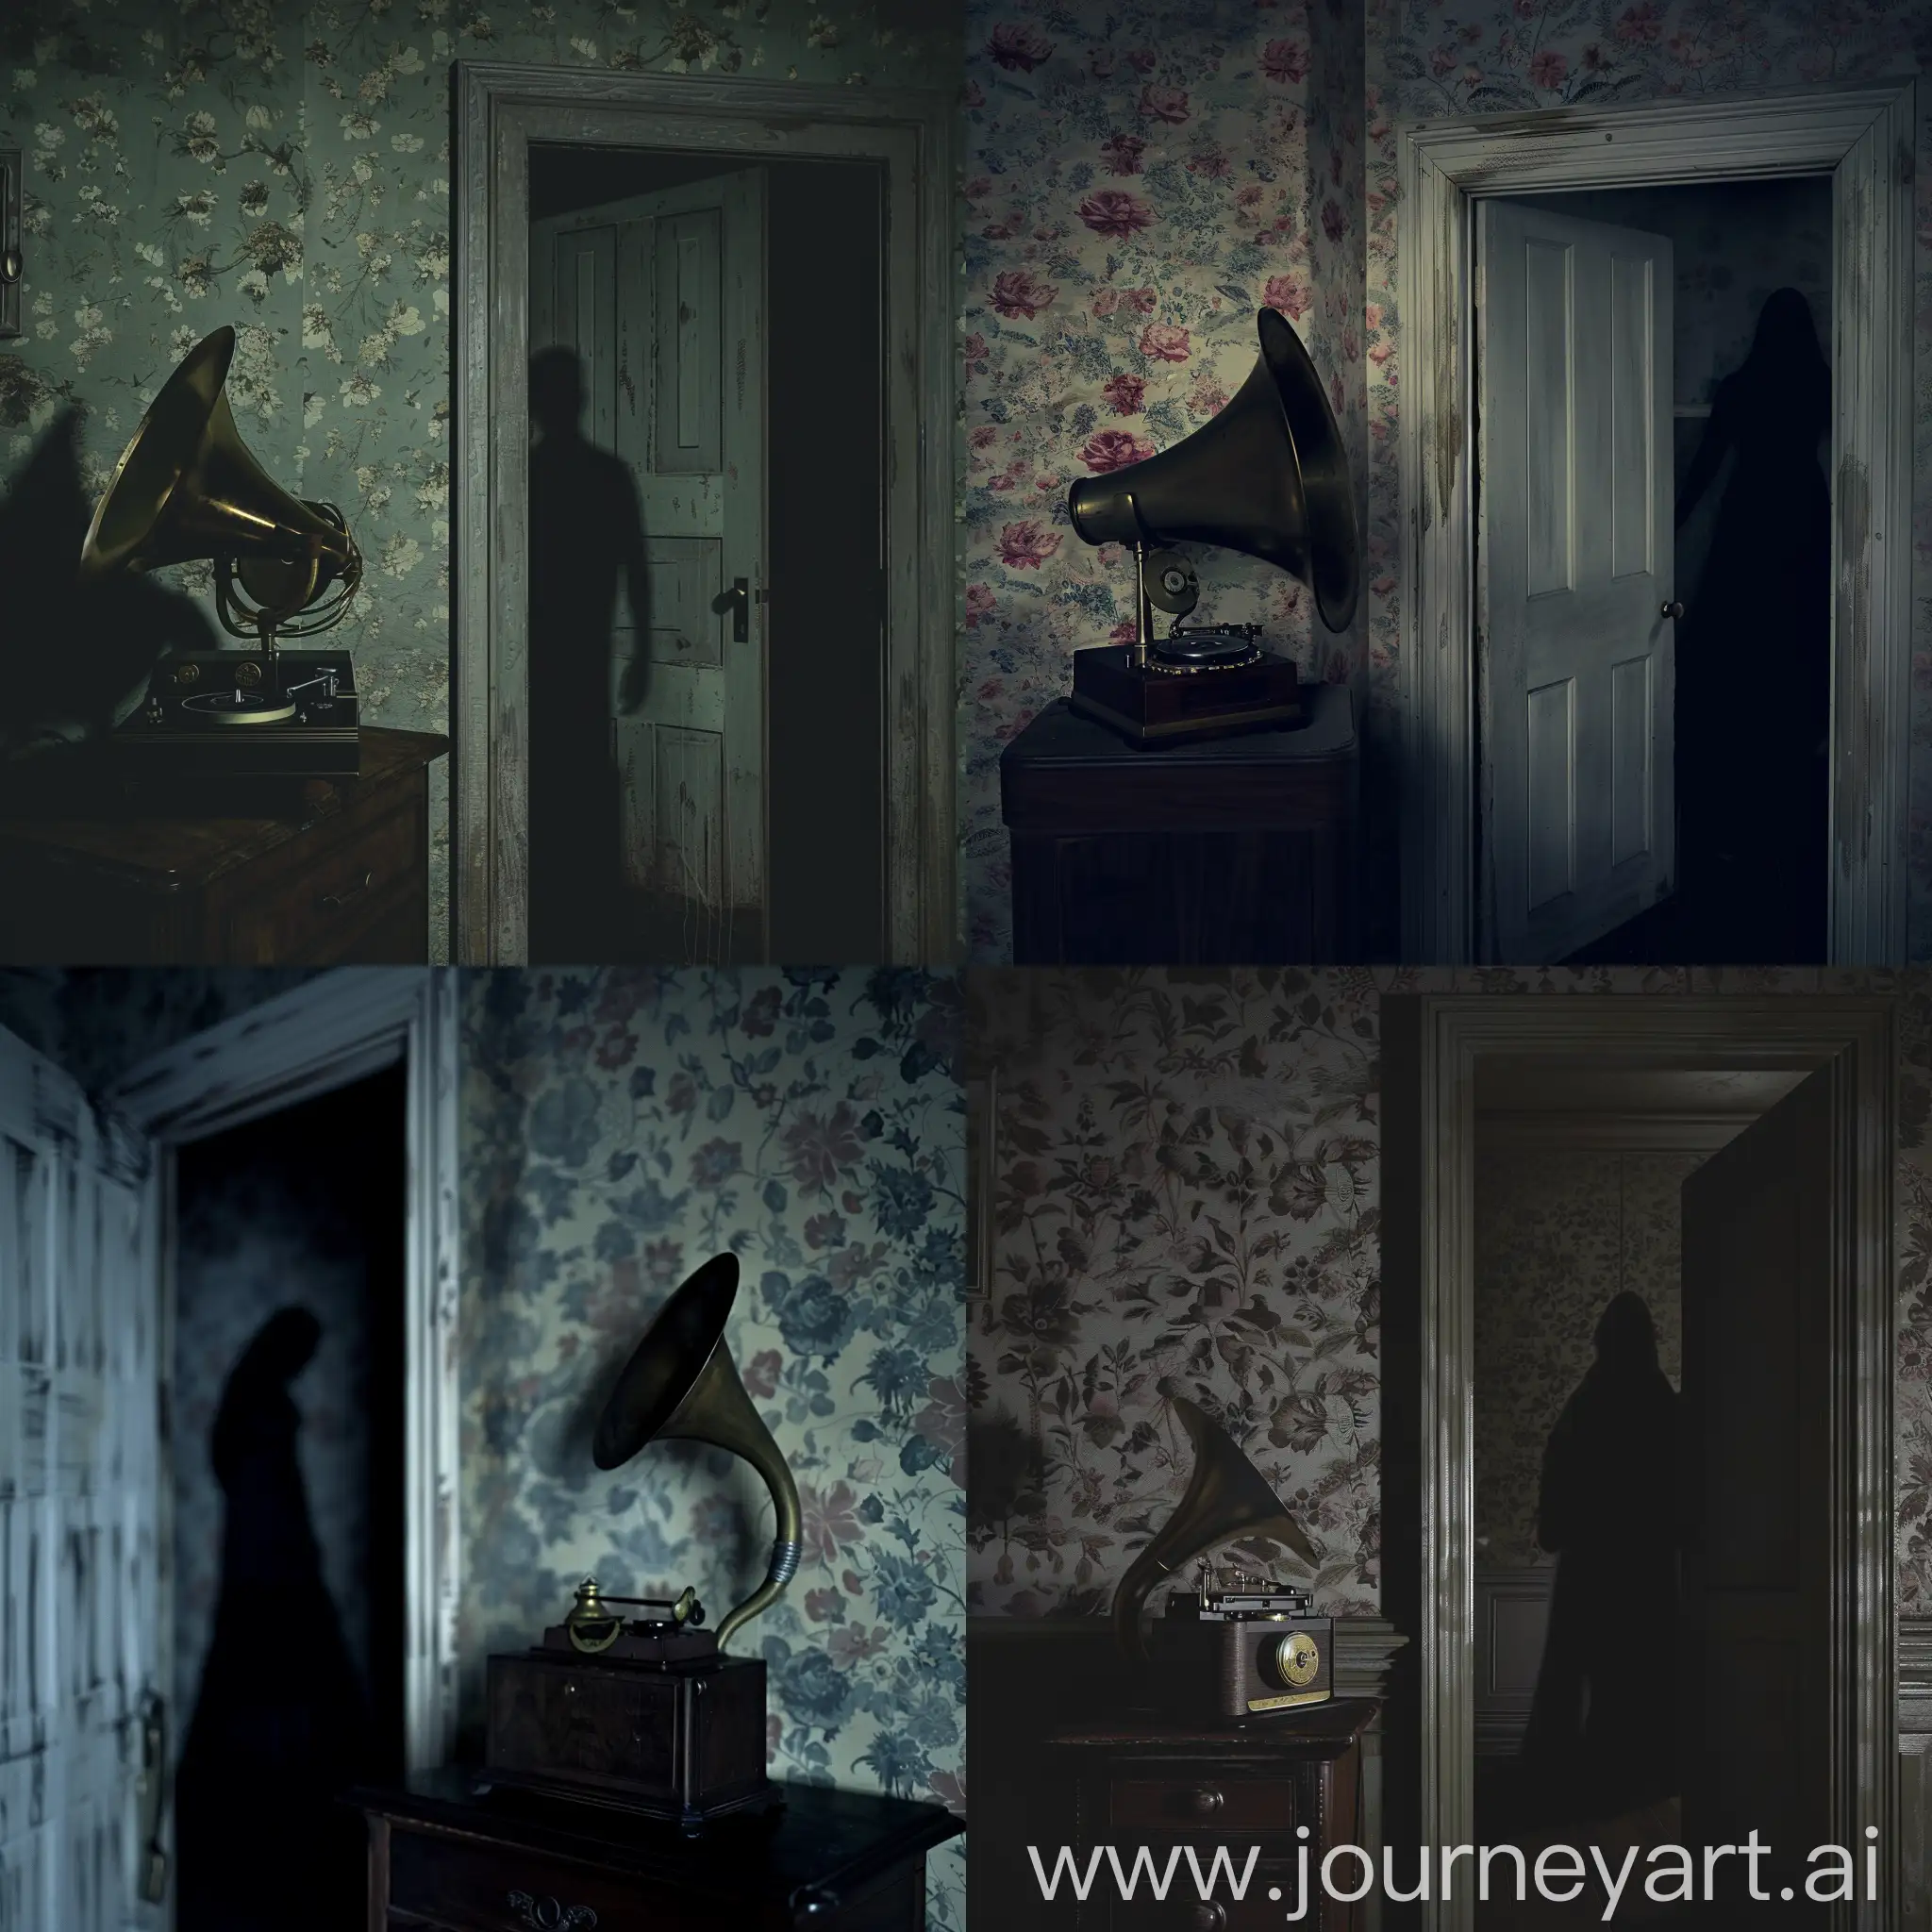 In a dimly lit nursery room, the walls embrace a sense of nostalgia with their vintage floral wallpaper. A mysterious door stands ajar, revealing only darkness beyond. The silhouette of a figure looms behind the door, partially obscured by shadows. An antique gramophone sits in the corner, its brass horn reflecting the faint light, adding a touch of eerie elegance to the scene. This image evokes a haunting blend of fear and intrigue, captivating the viewer with its classic allure